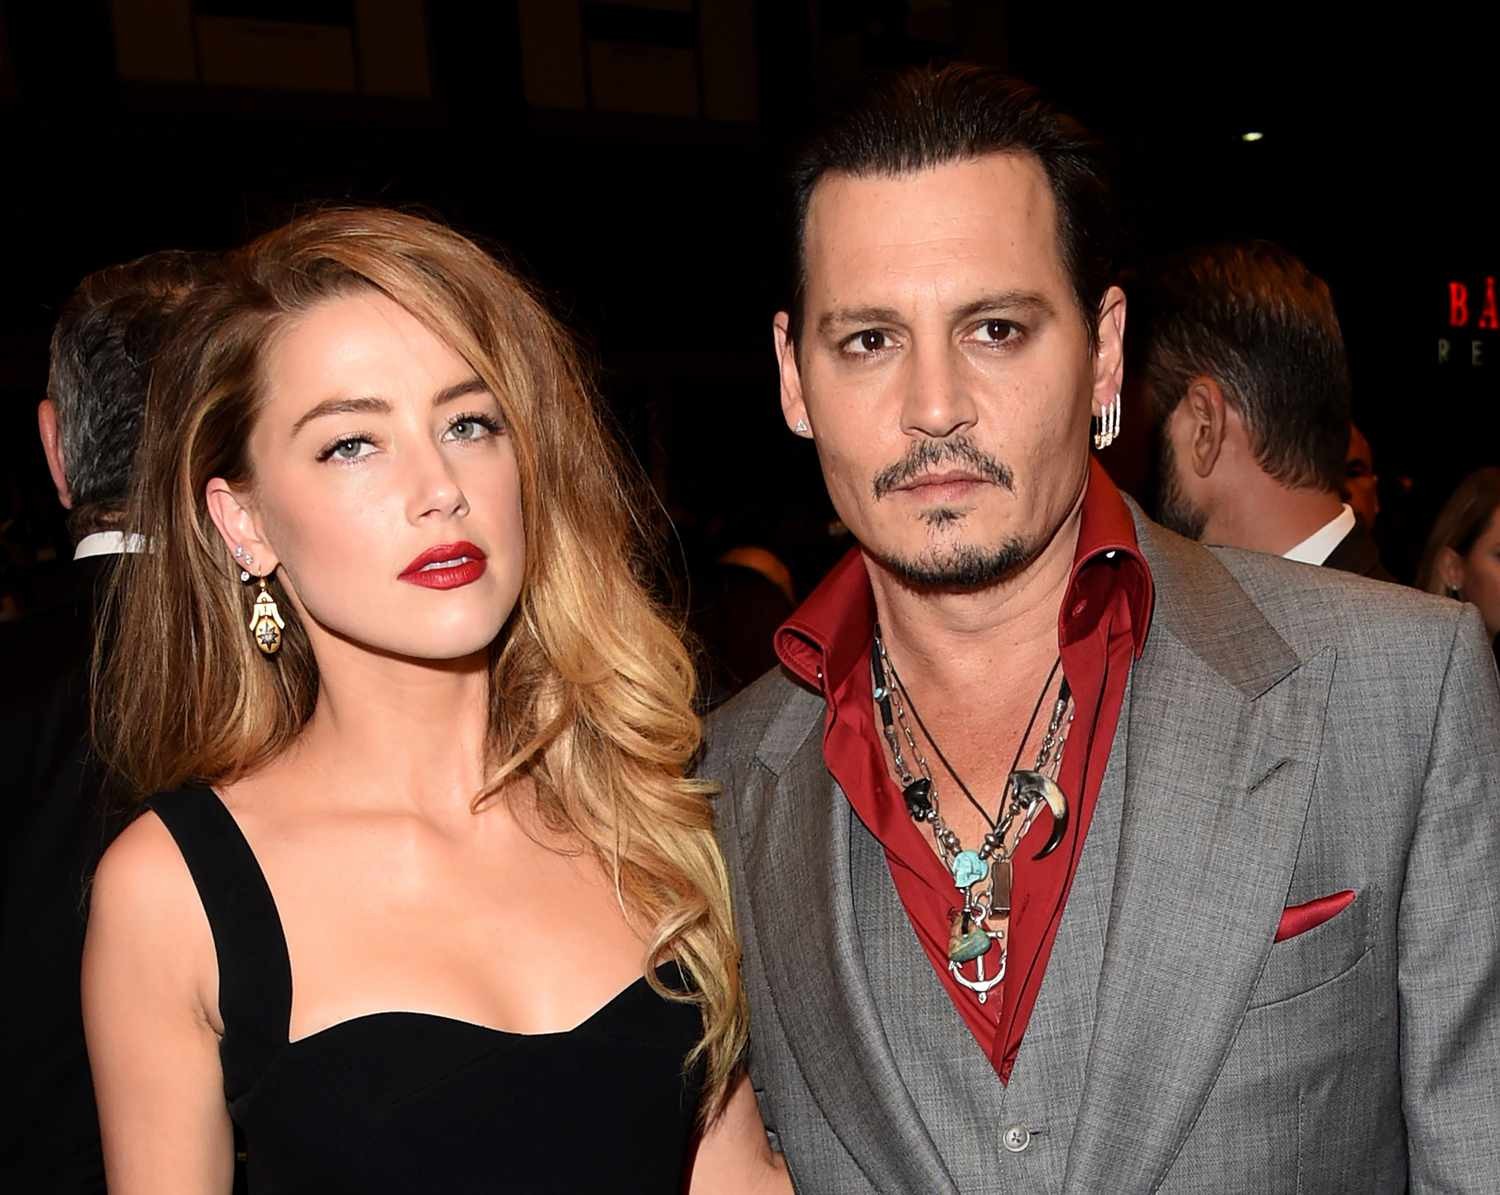 Johnny Depp and Amber Heard's careers are shattered post-trial.